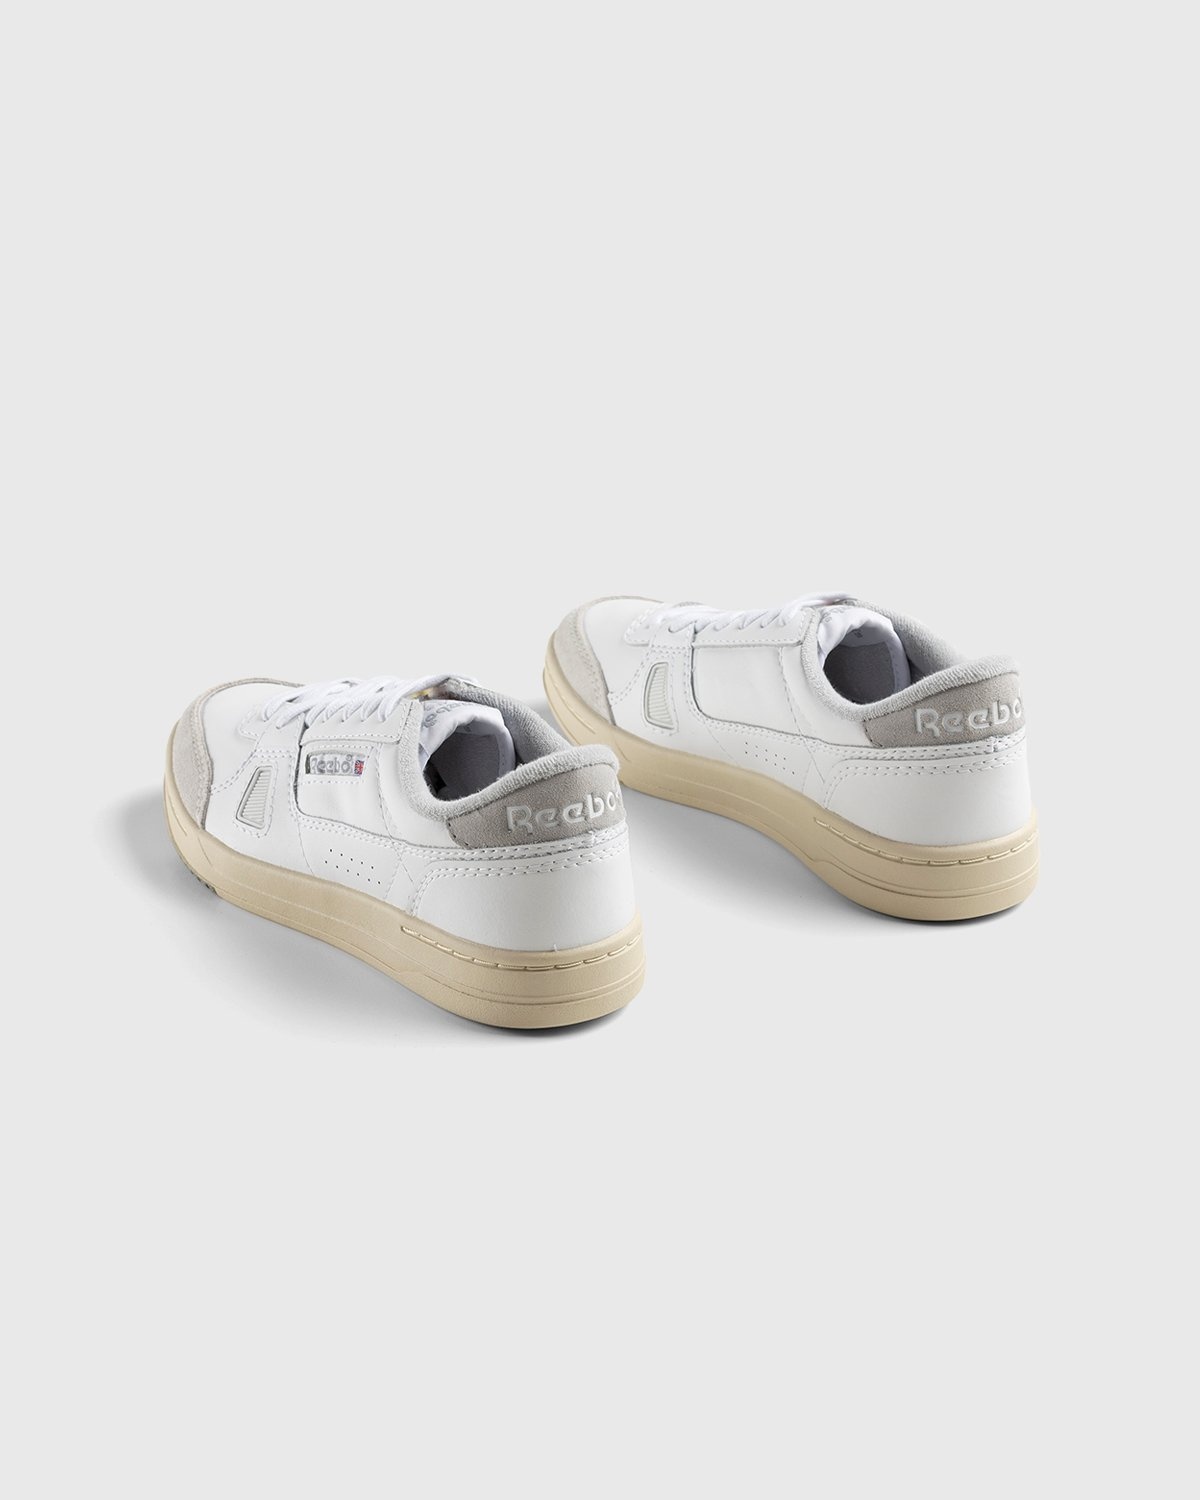 Reebok – LT Court Cloud White / Pure Grey 3 / Alabaster - Sneakers - White - Image 4